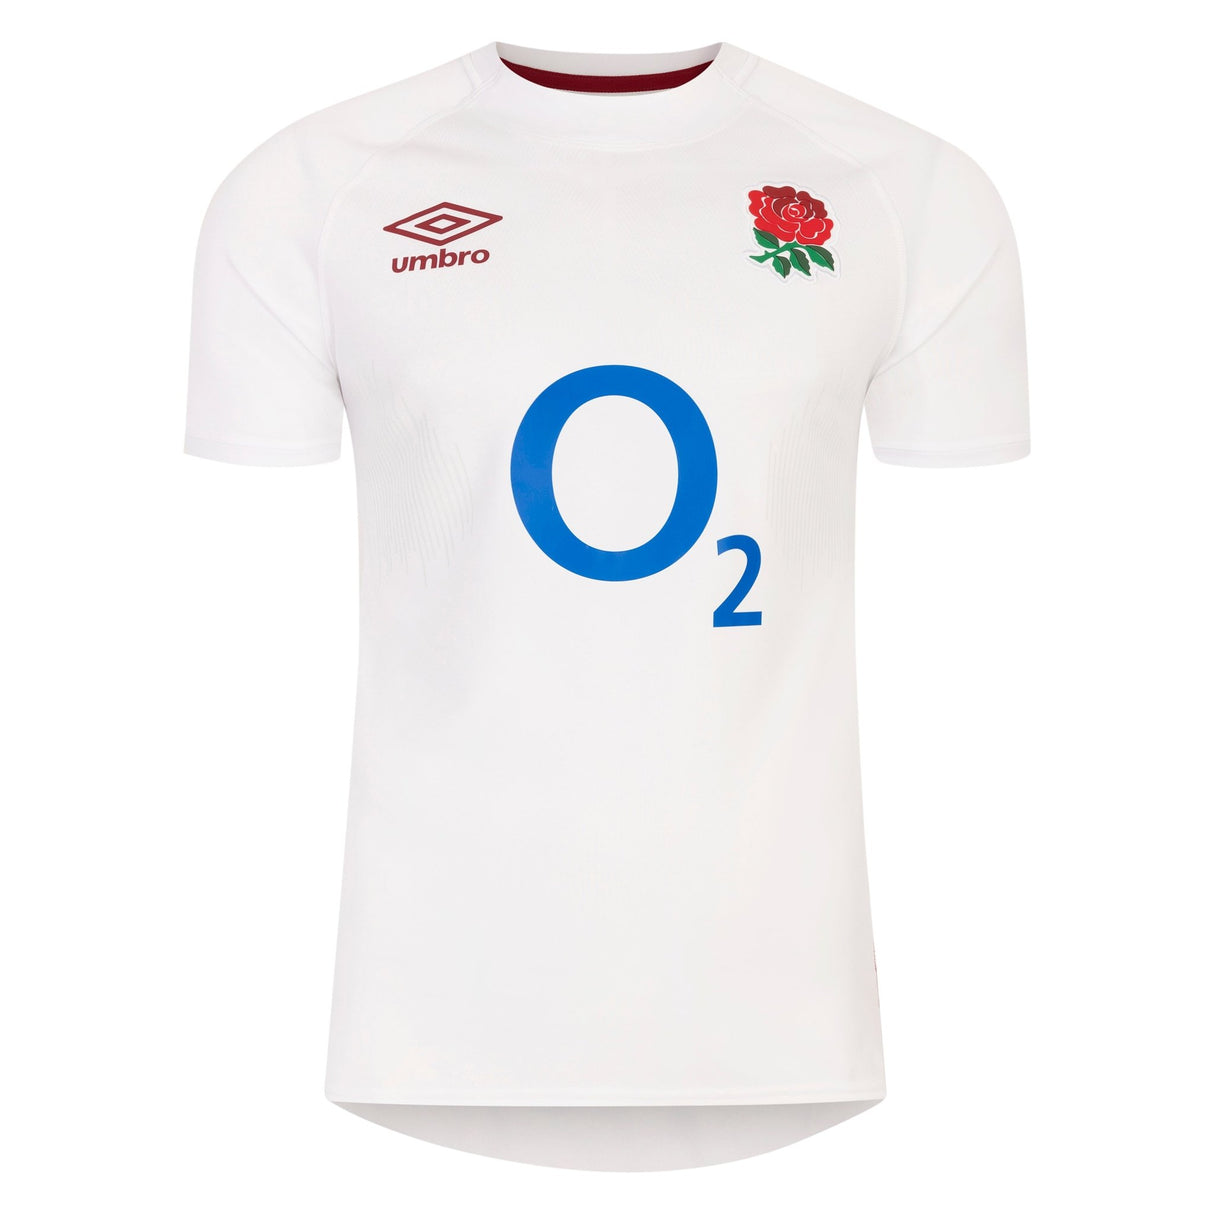 Umbro Junior England Rugby Home Replica Jersey 23/24 - White |Kids Replica Jersey | Umbro RFU | Absolute Rugby